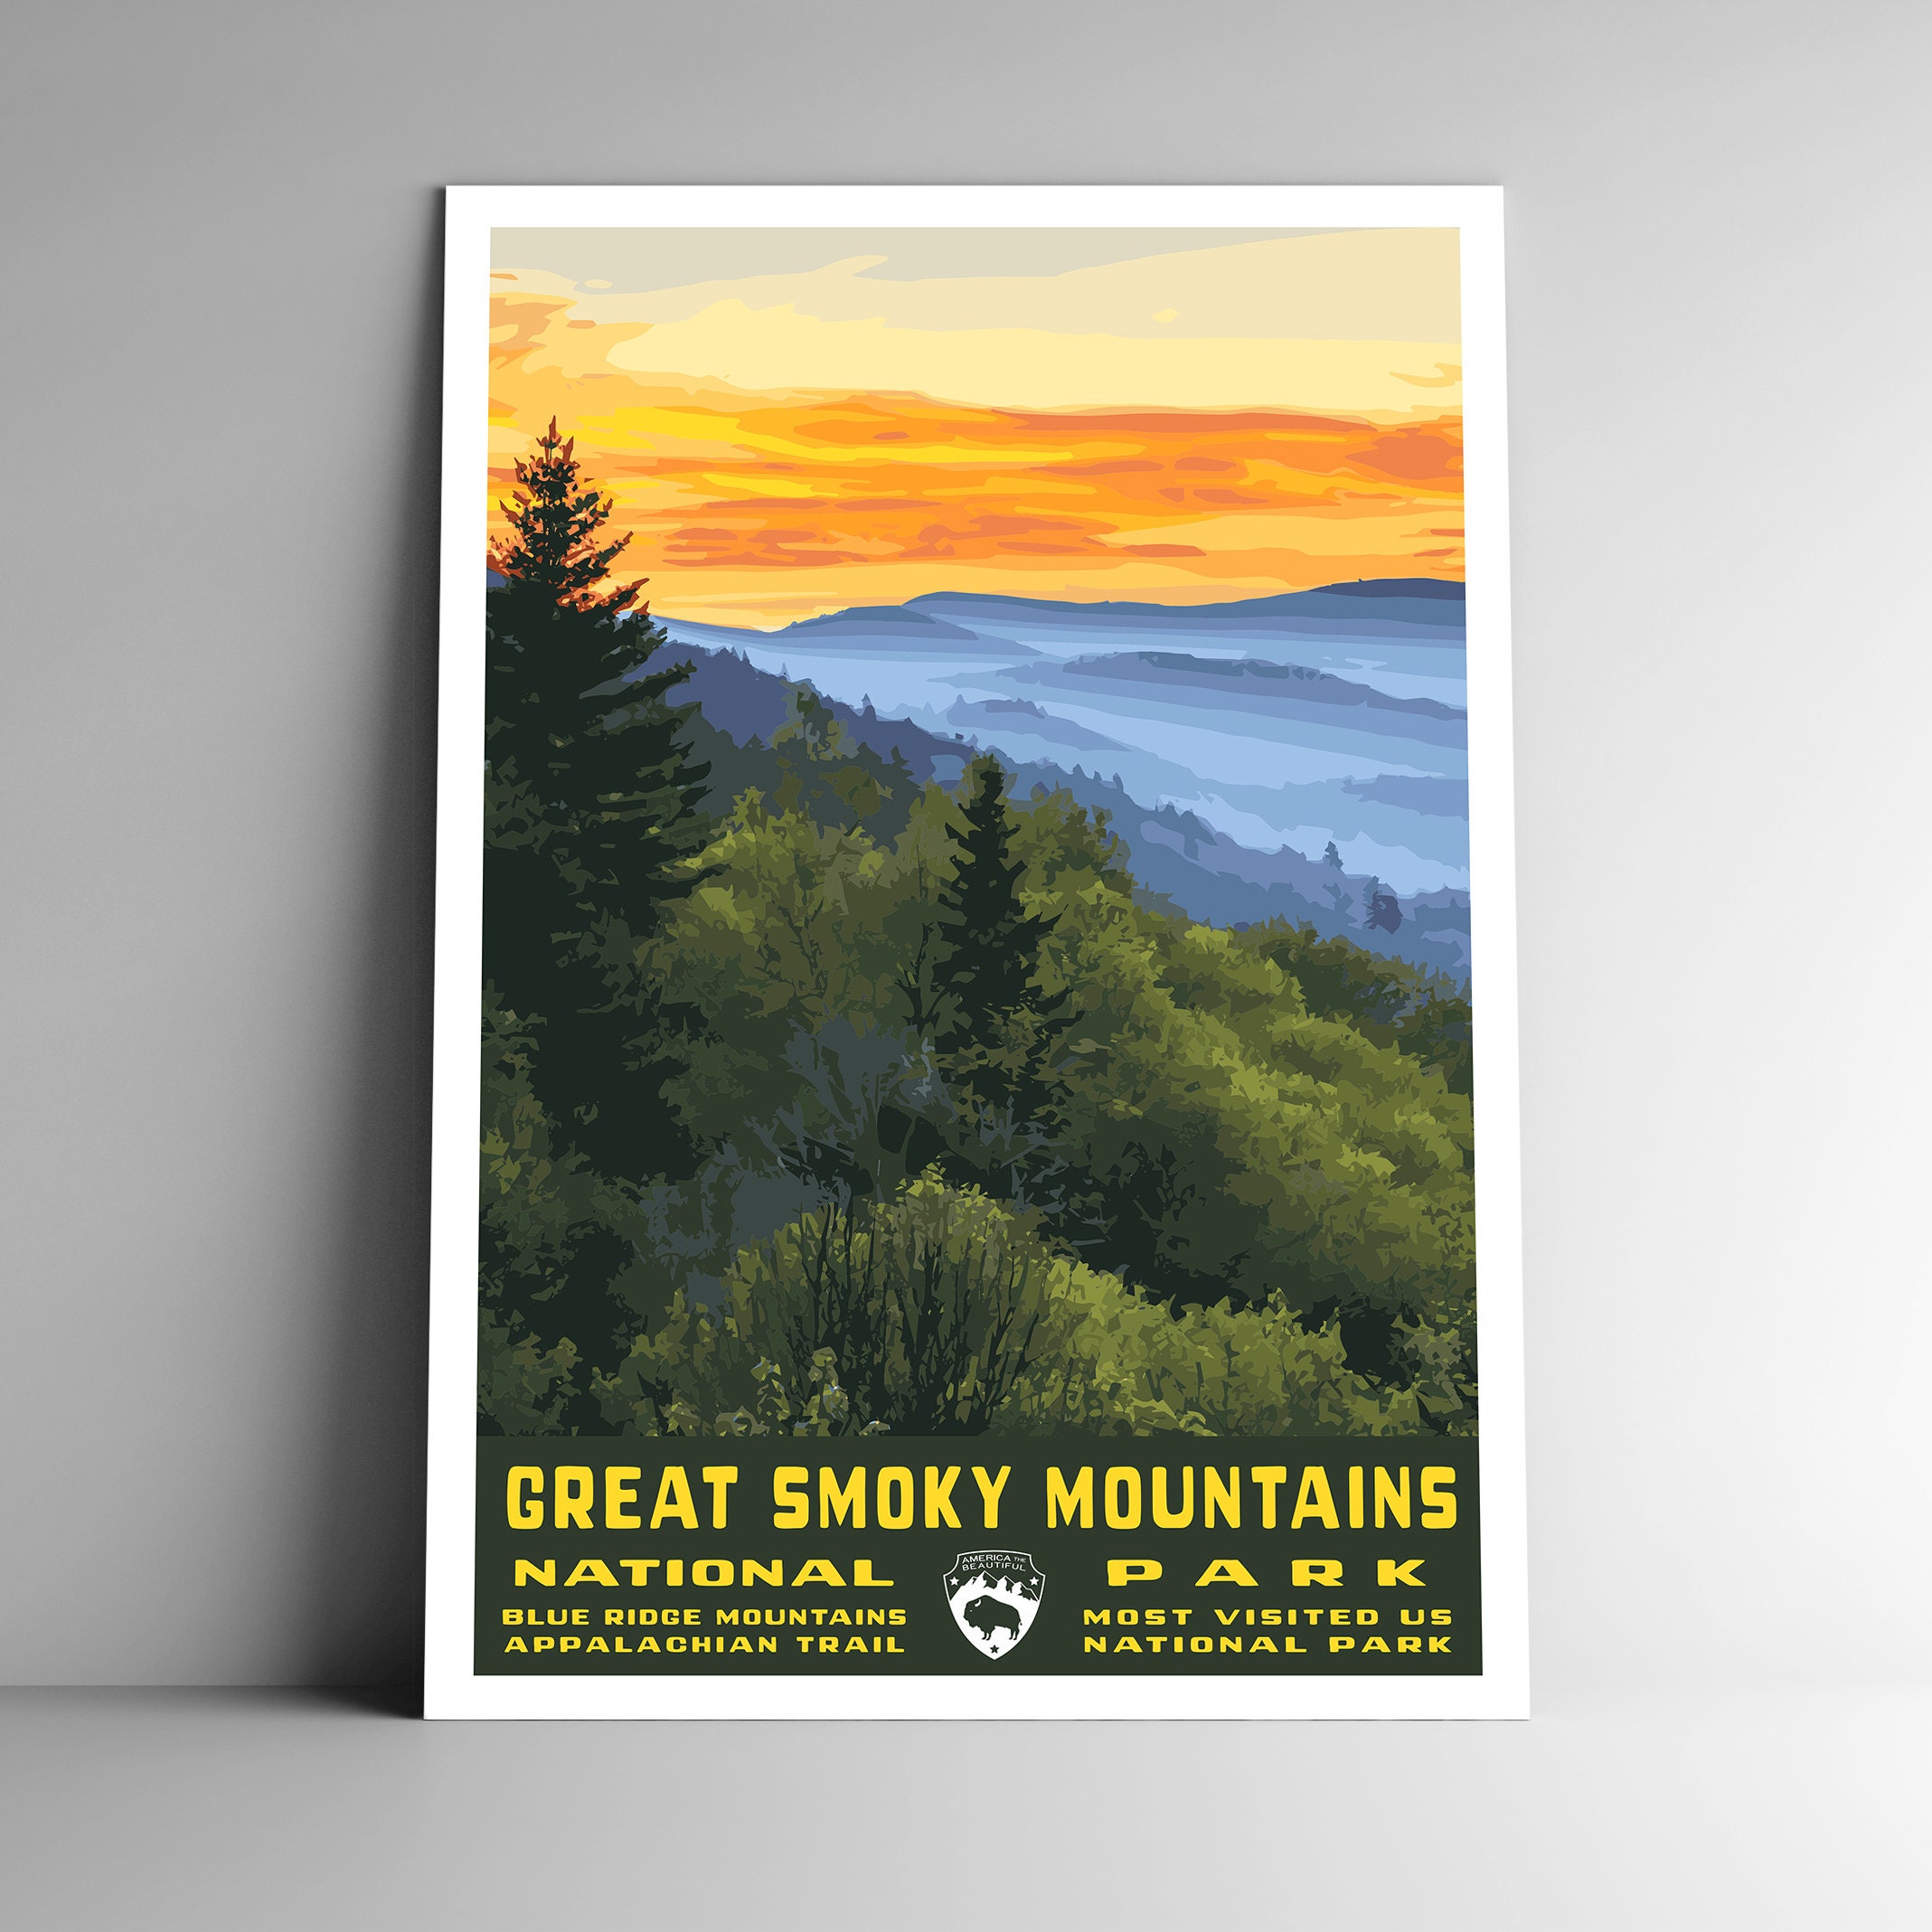 Great Smoky Mountains National Park Vintage-style Travel Poster